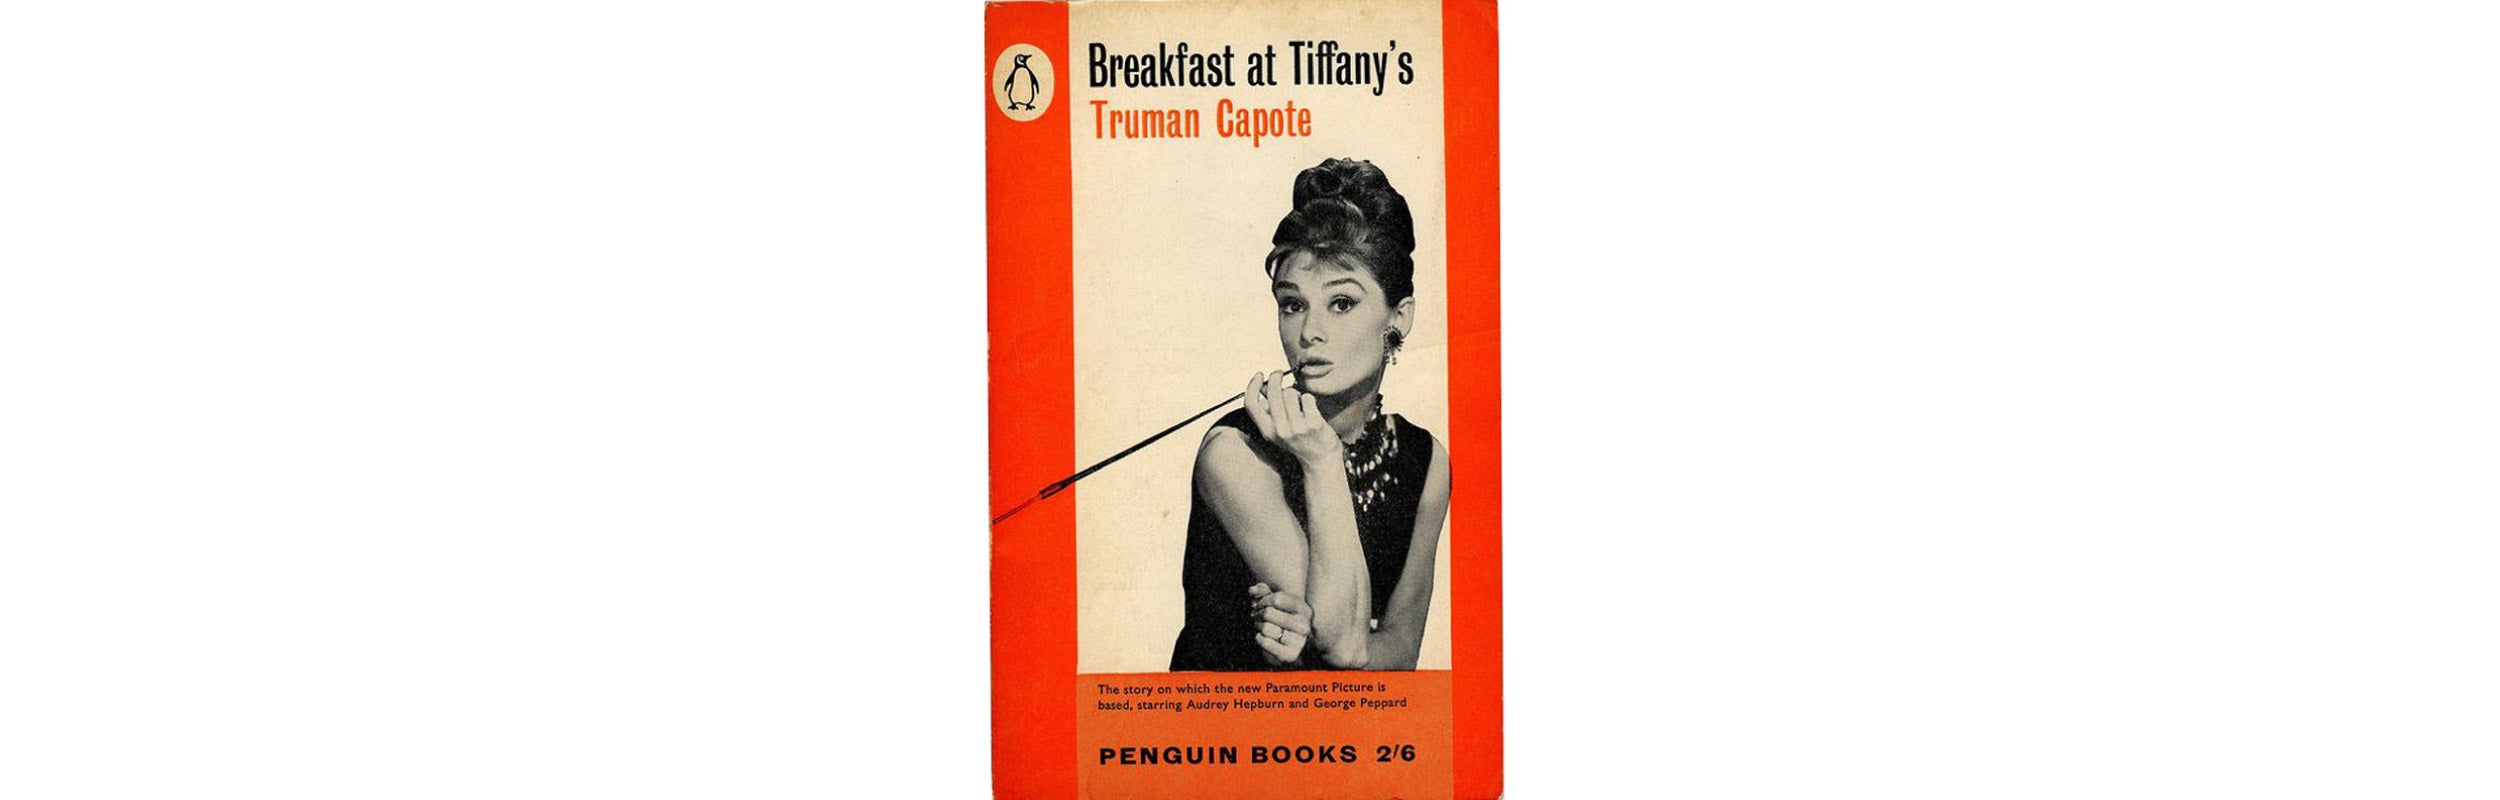 "Breakfast at Tiffany's" book cover.